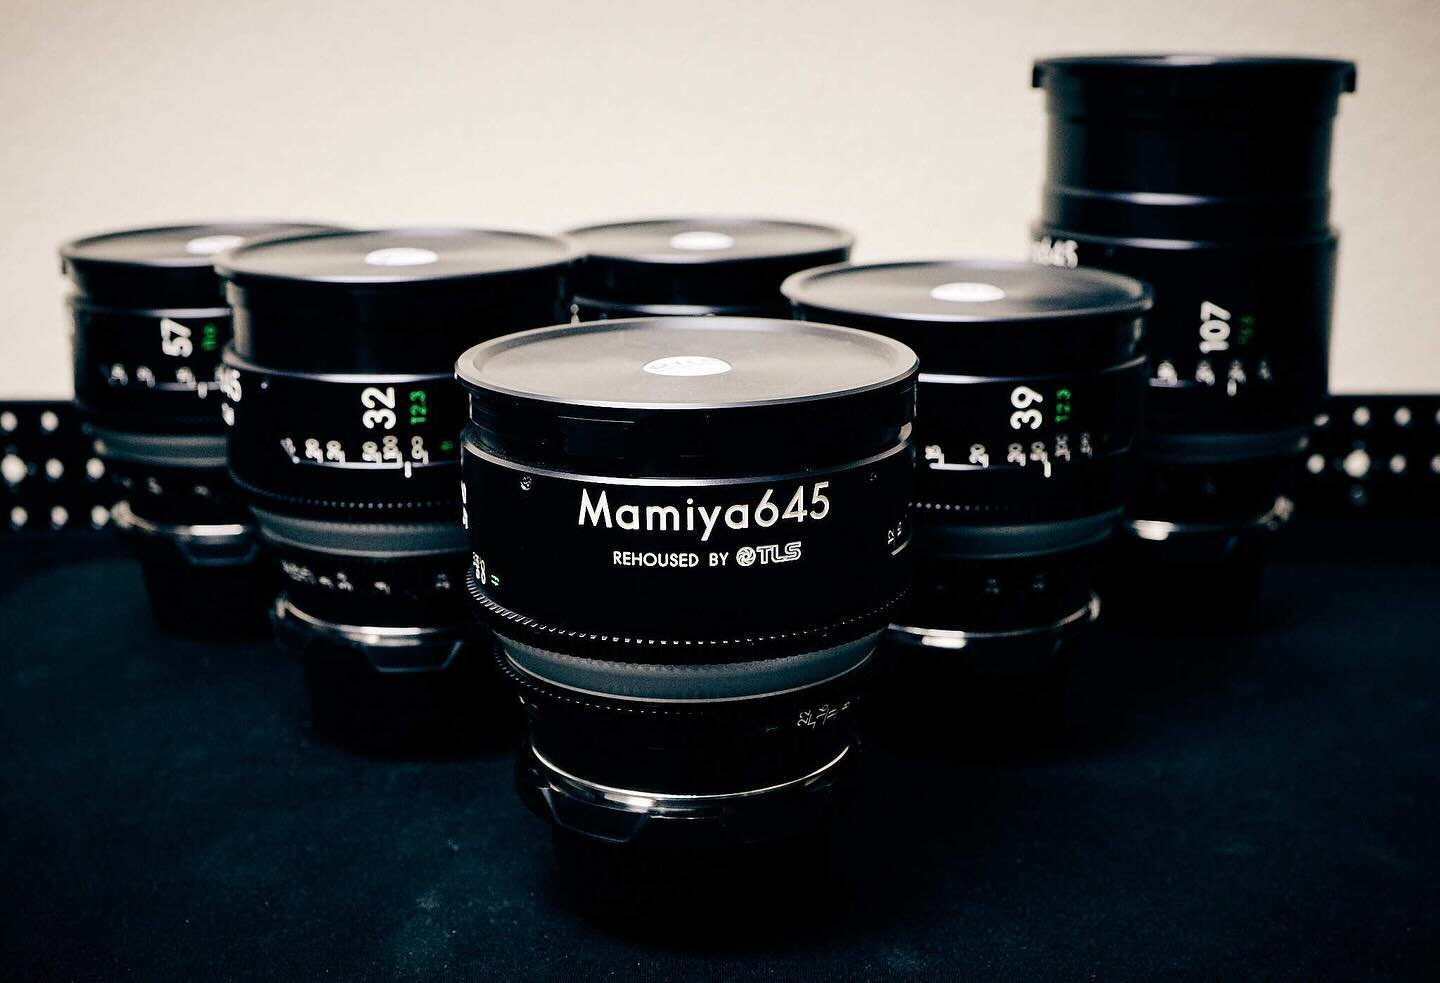 Our Mamiya lenses rehoused by @truelensservices with each focal length having its own built in speed booster made for full frame sensors  that covers VV sensors amply. Our 6-lens set includes:

25mm T2.8
32mm T2.3
39mm T2.3
57mm T1.6
78mm T2.3
107mm 